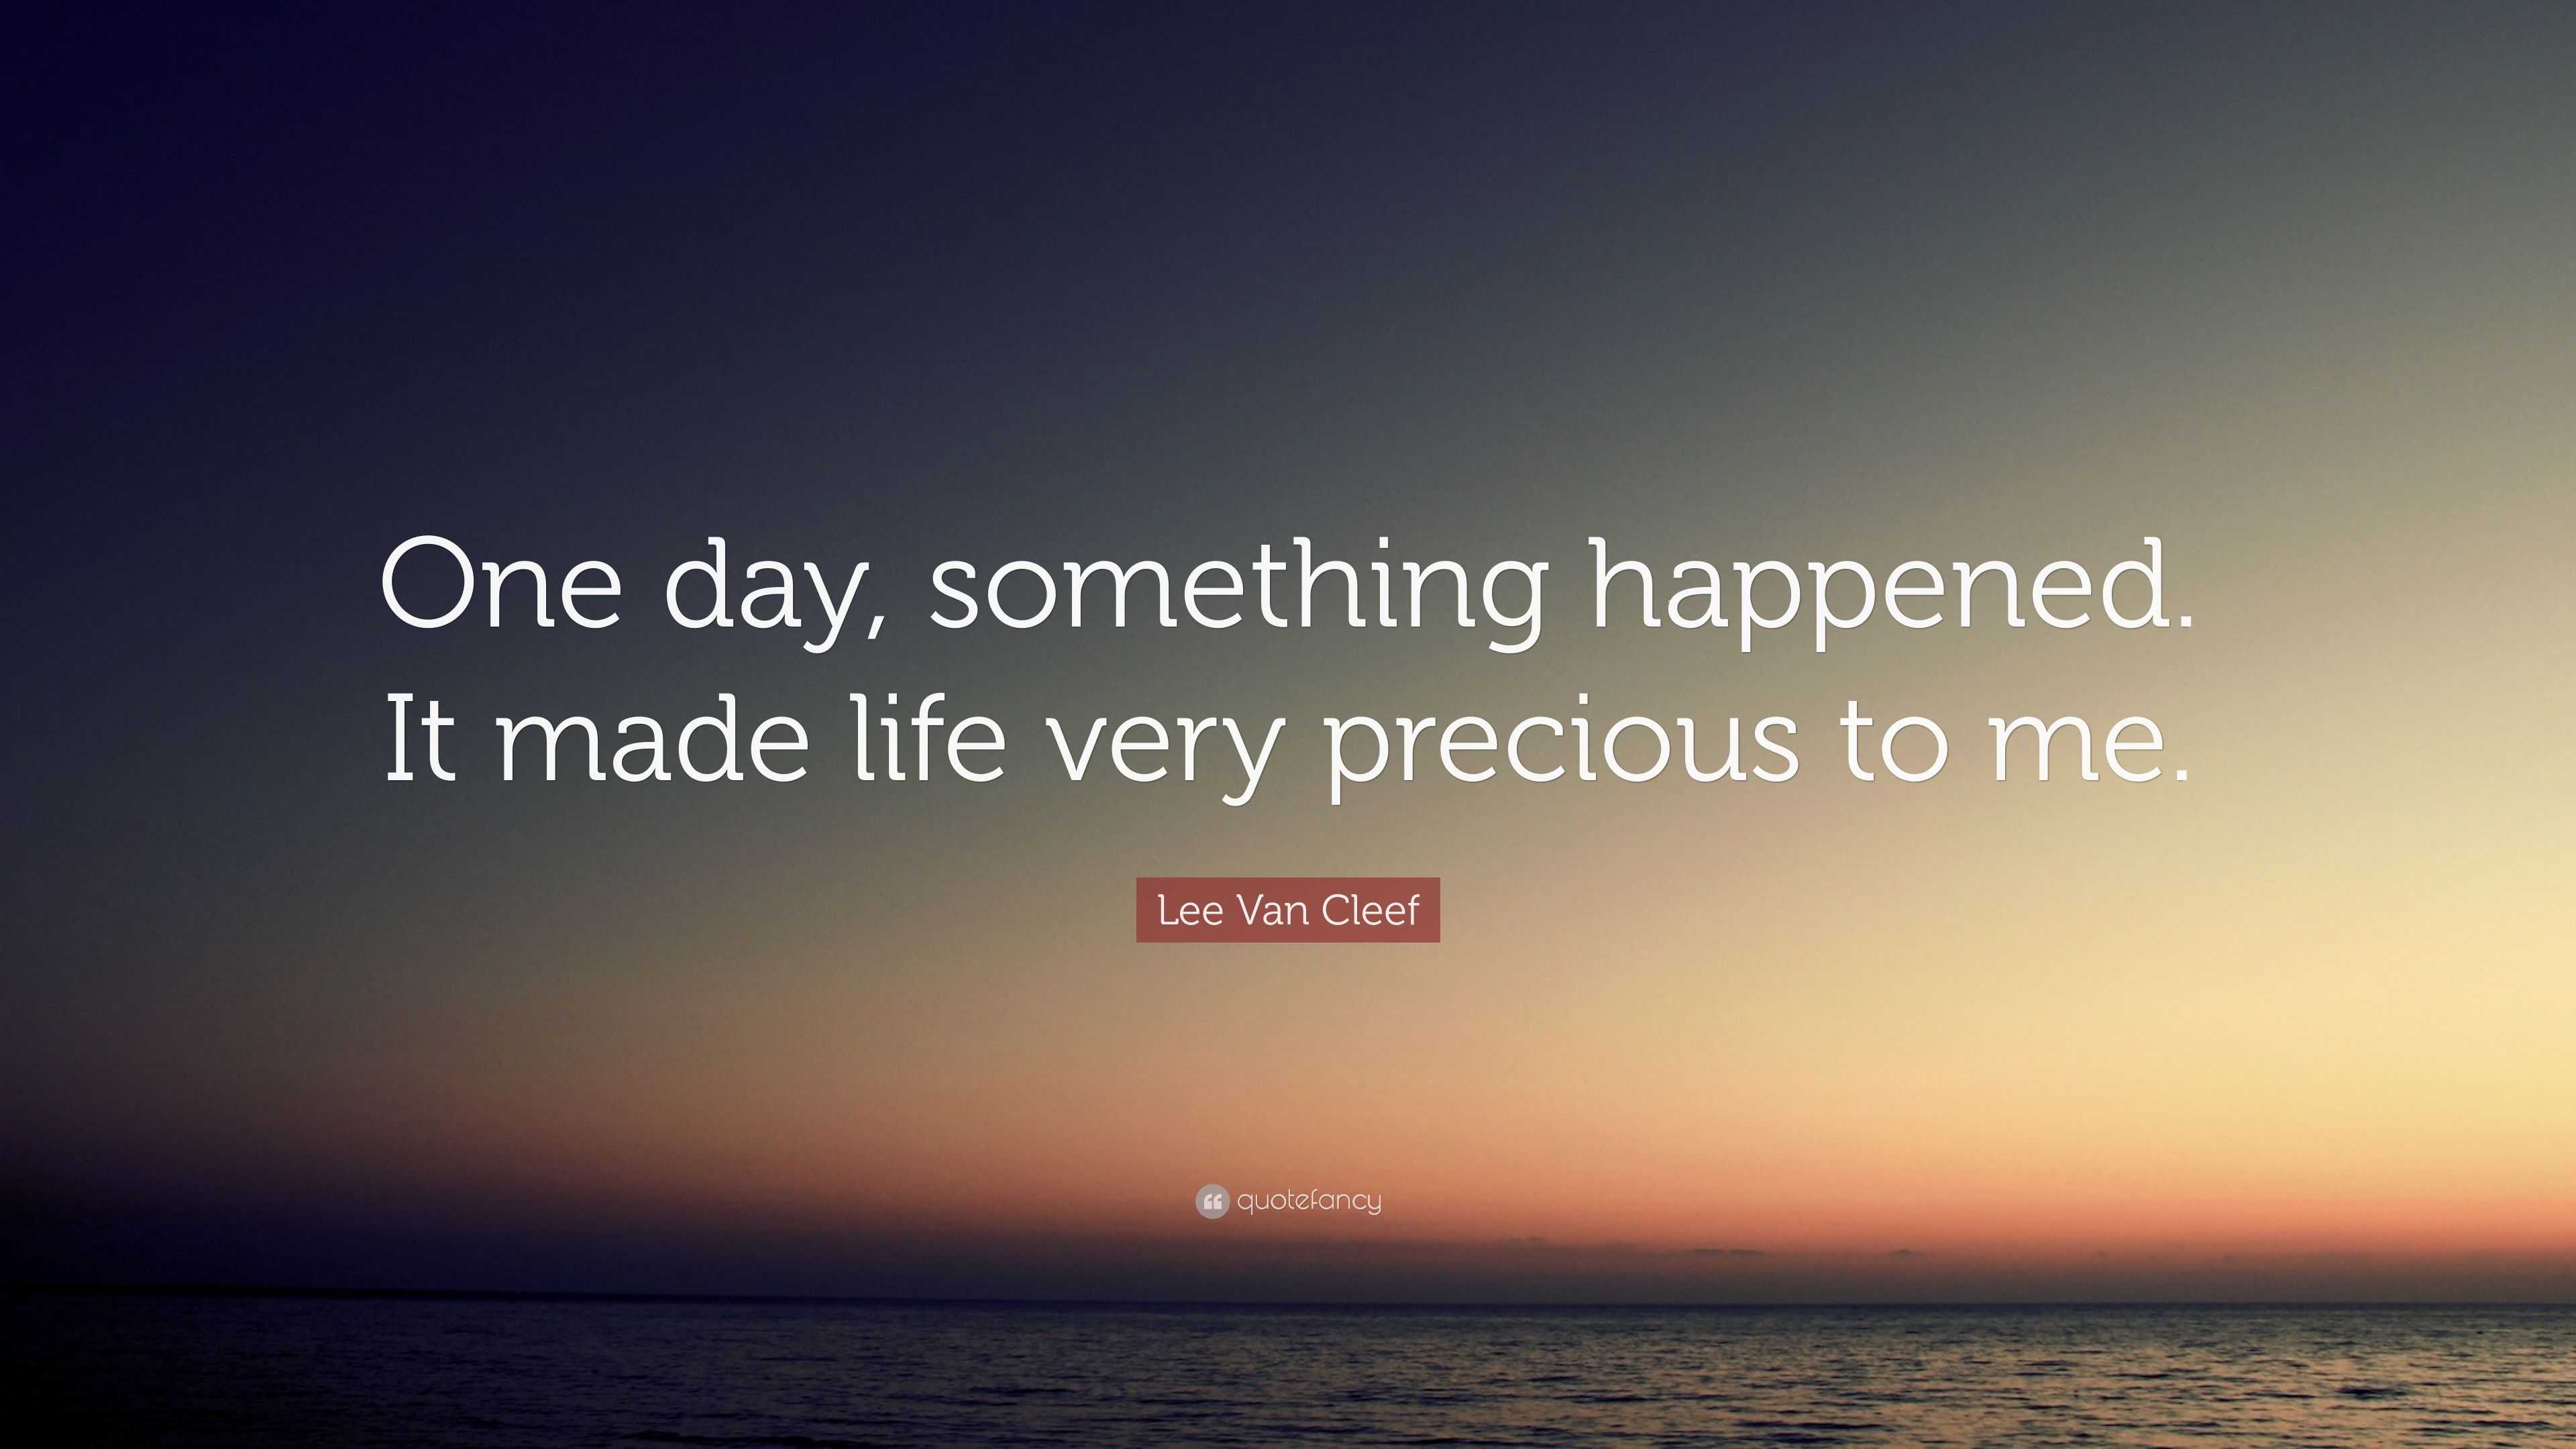 Lee Van Cleef Quote: “One day, something happened. It made life very ...